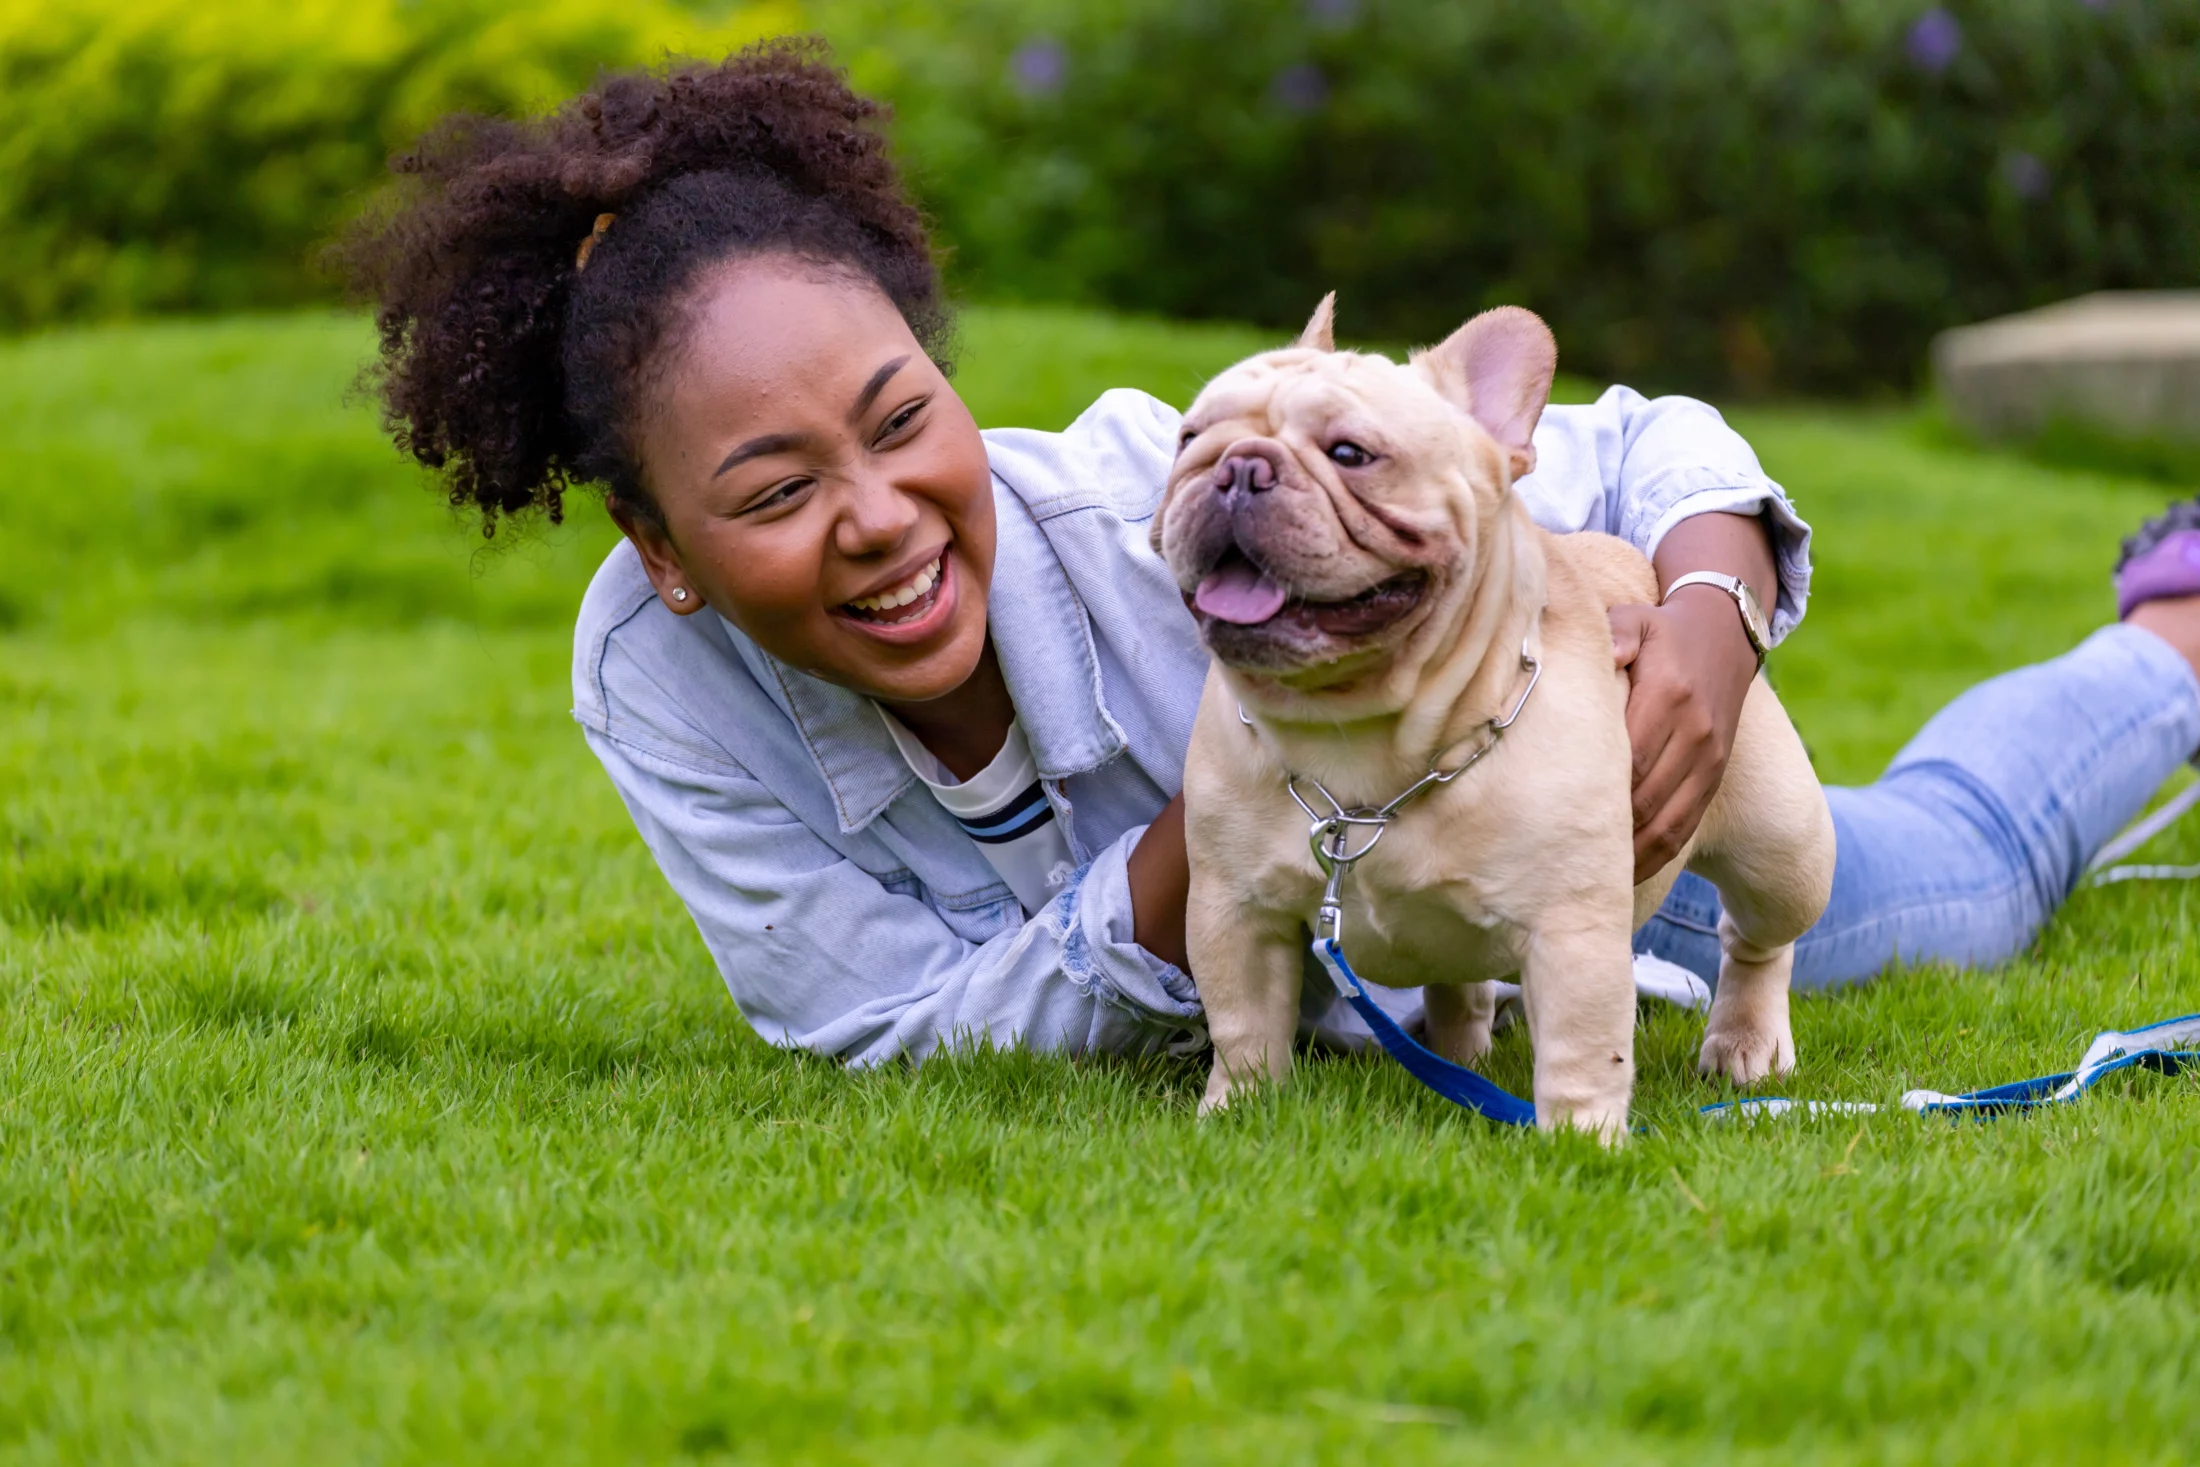 no spend weekend ideas: dote on your pet | Swoosh Finance